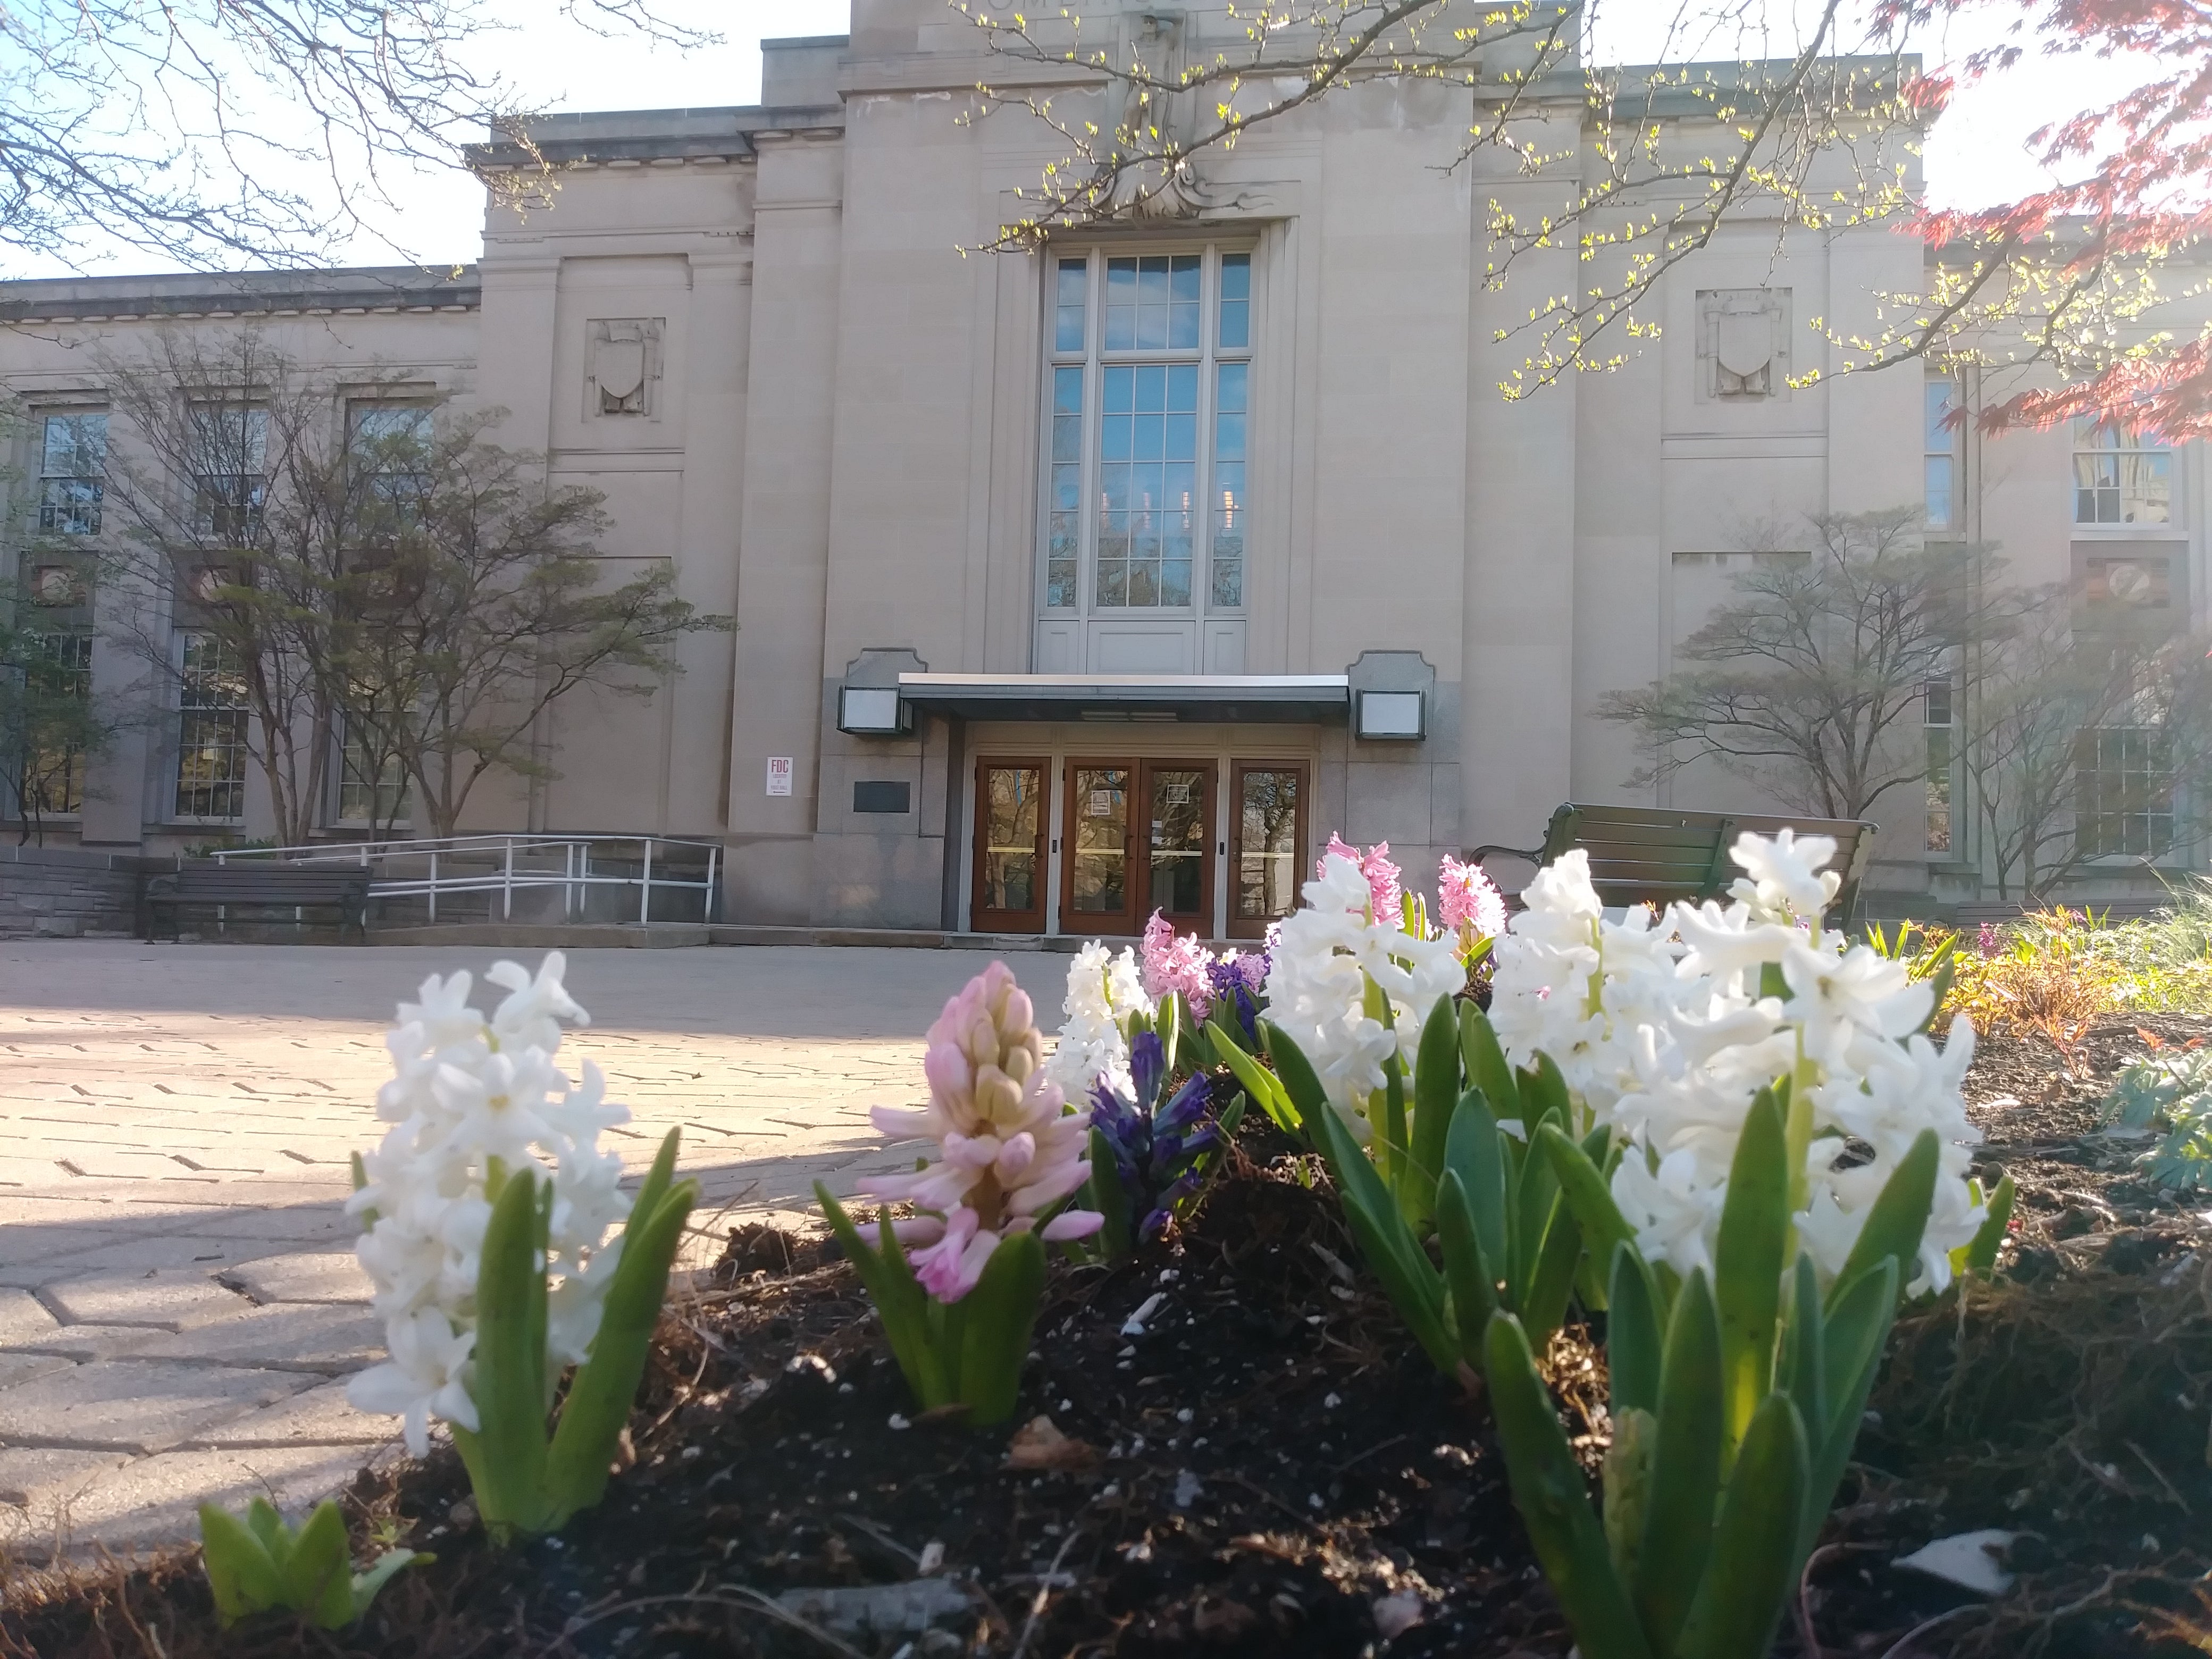 Blooming flowers outside Tomlinson Hall, April 2021